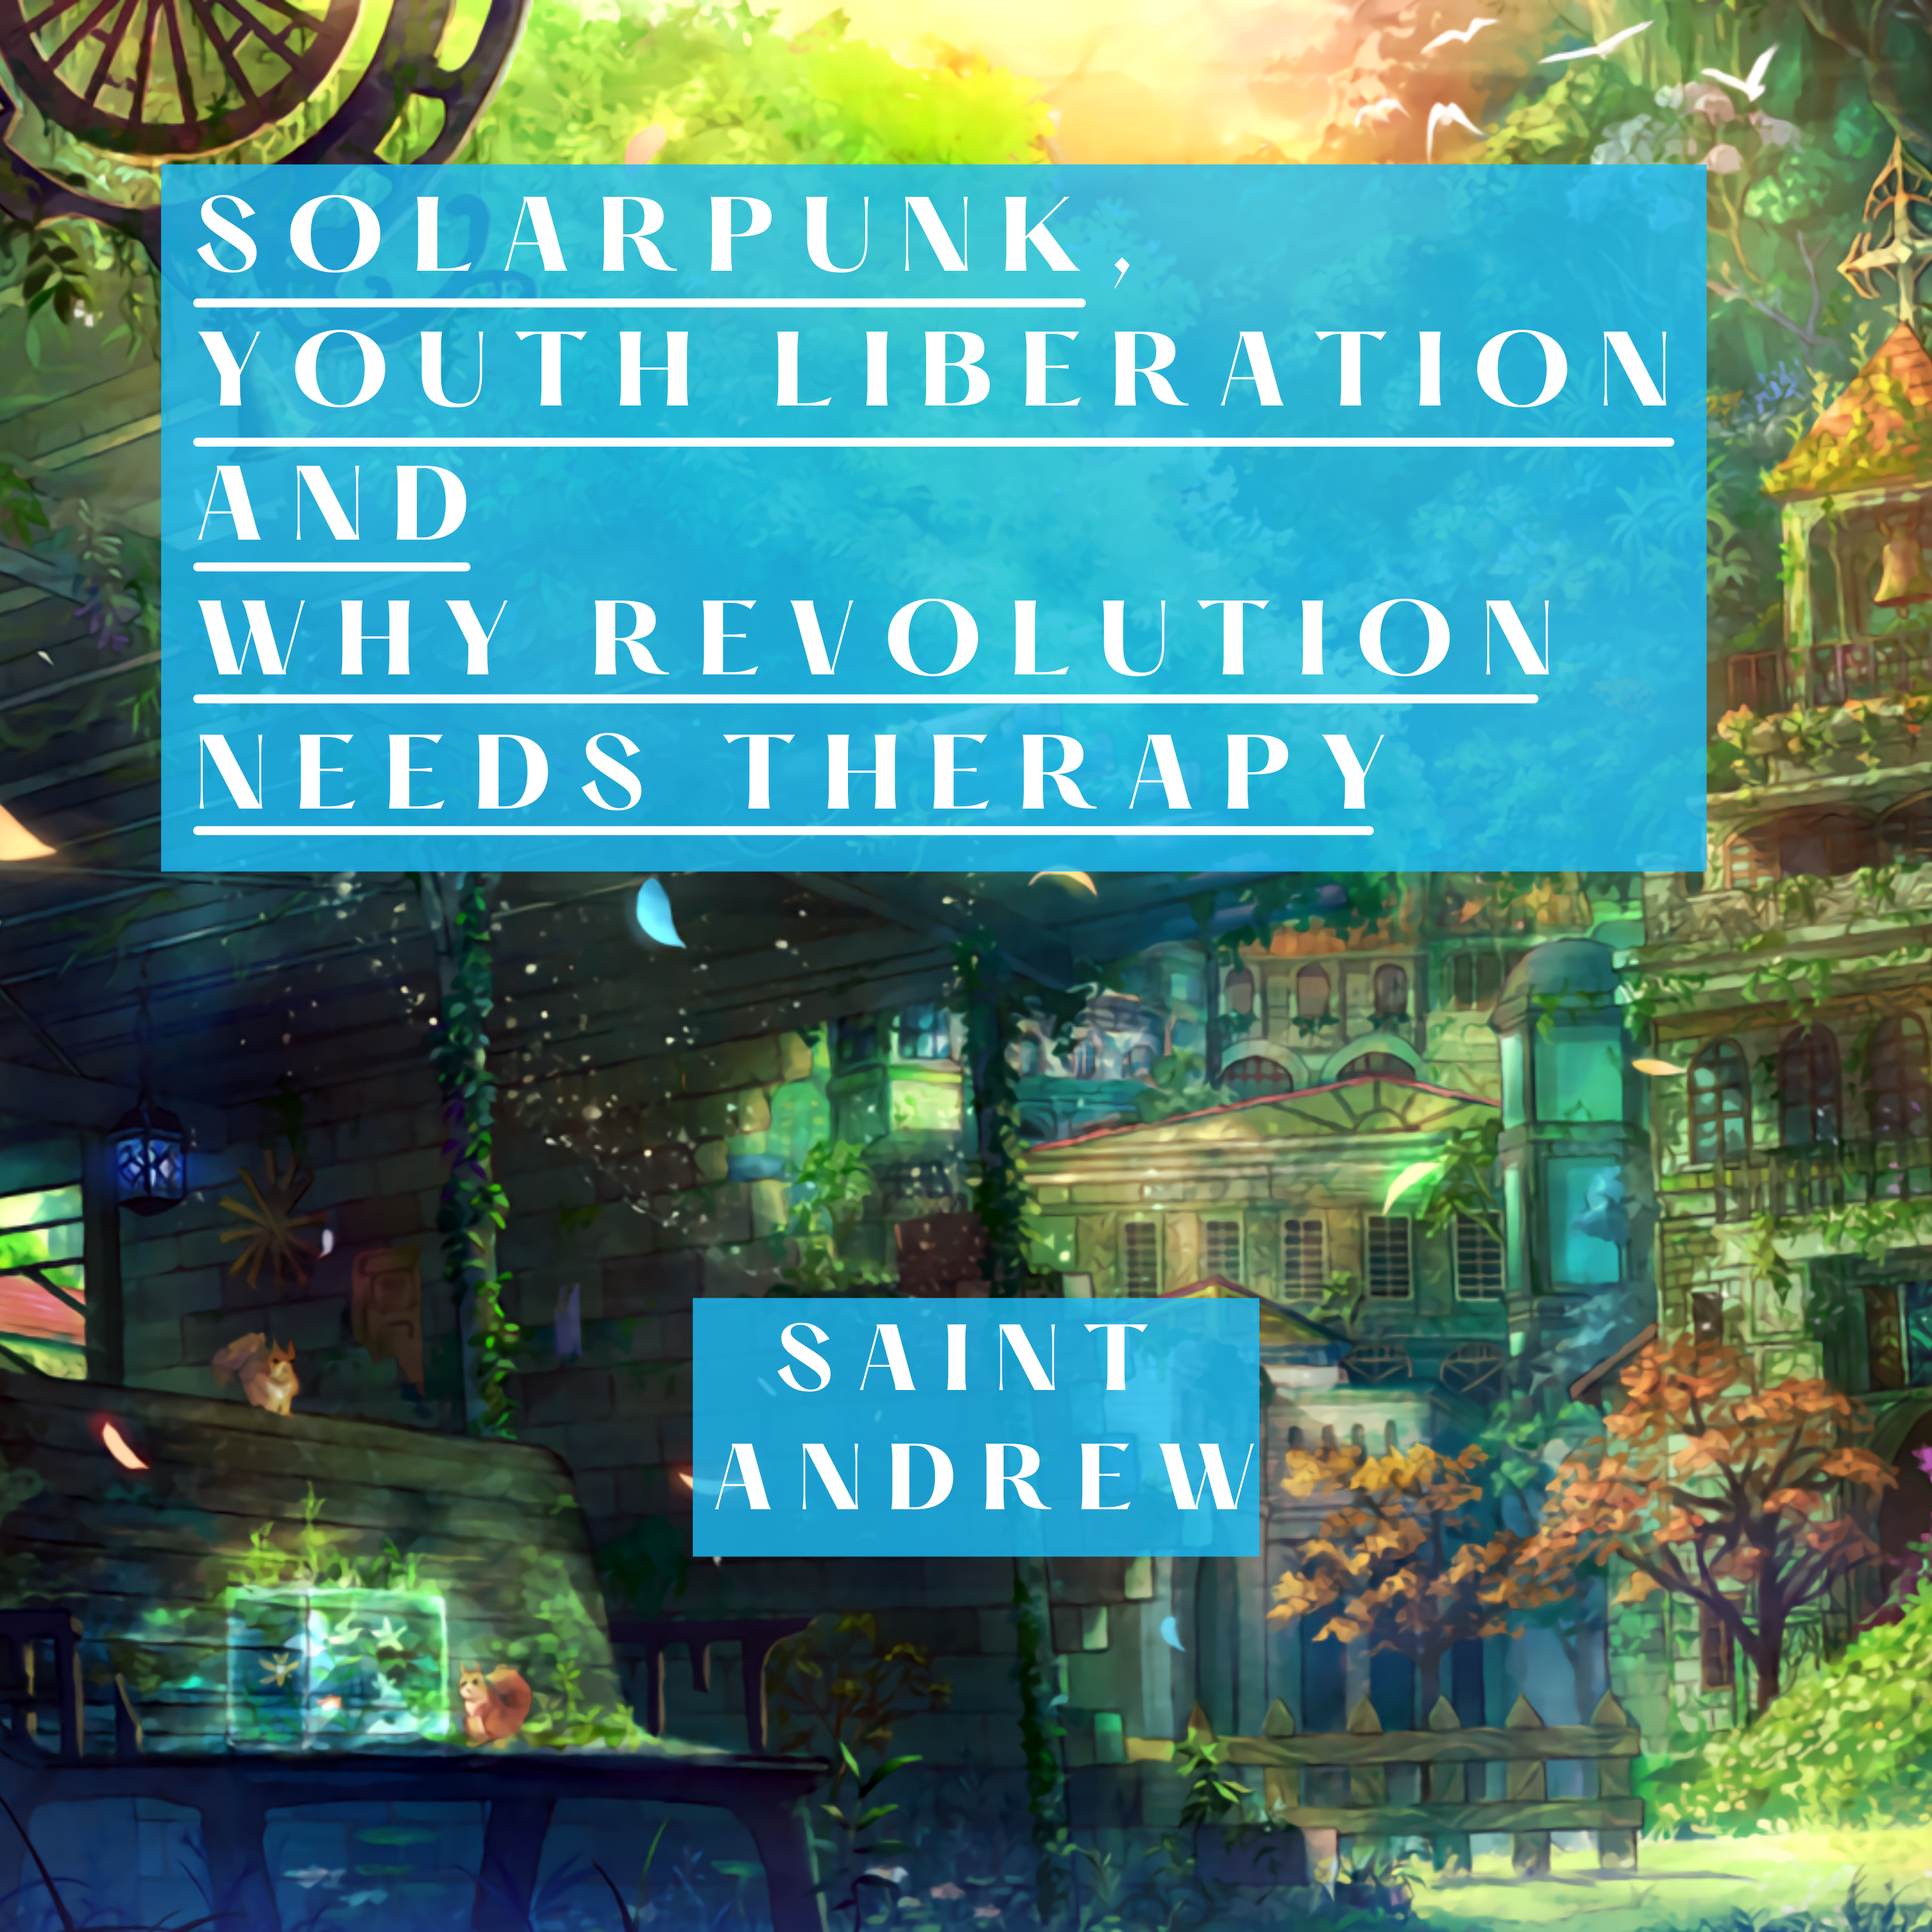 68/ Solarpunk, Youth Liberation and Why Revolution Needs Therapy (with Saint Andrew)